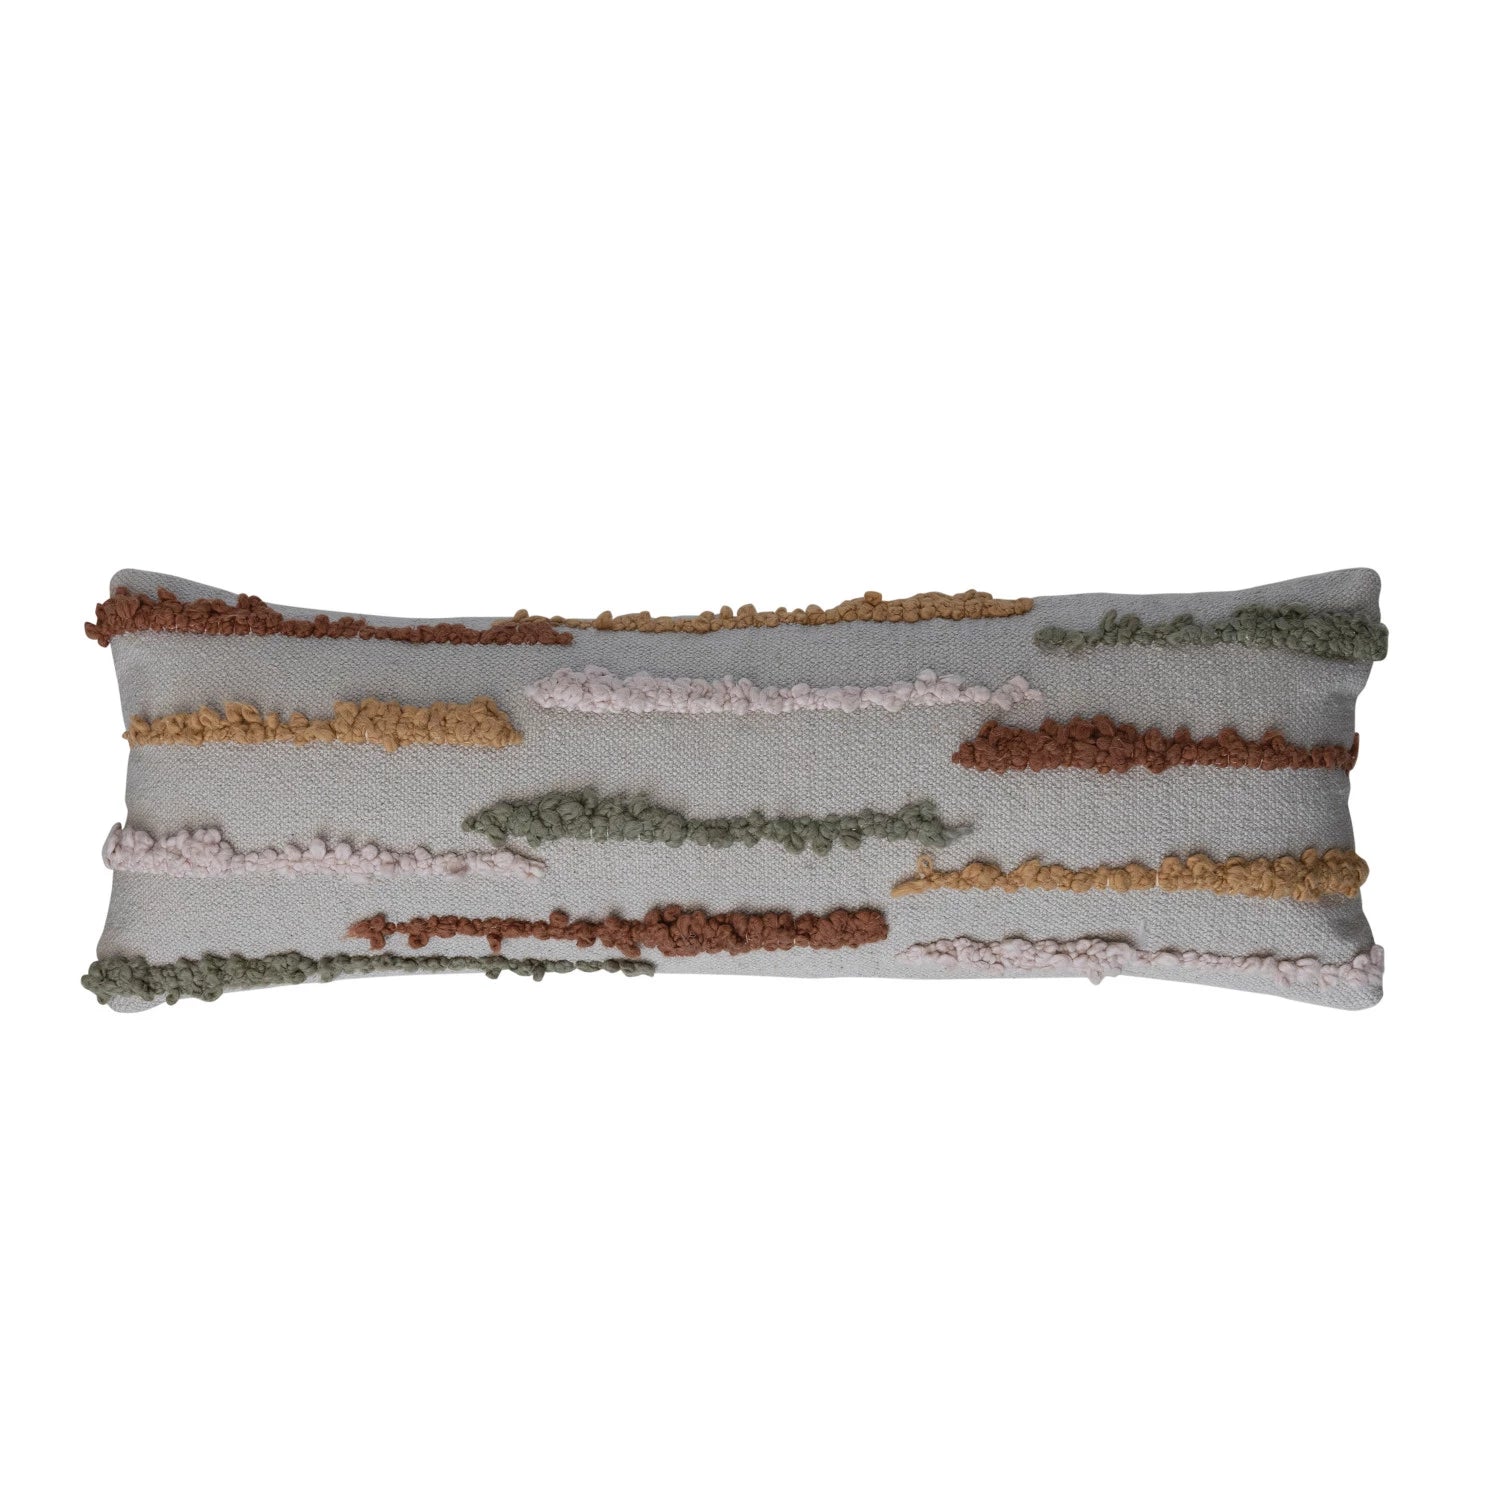 Woven Cotton Lumbar Pillow with Tufted Embroidery